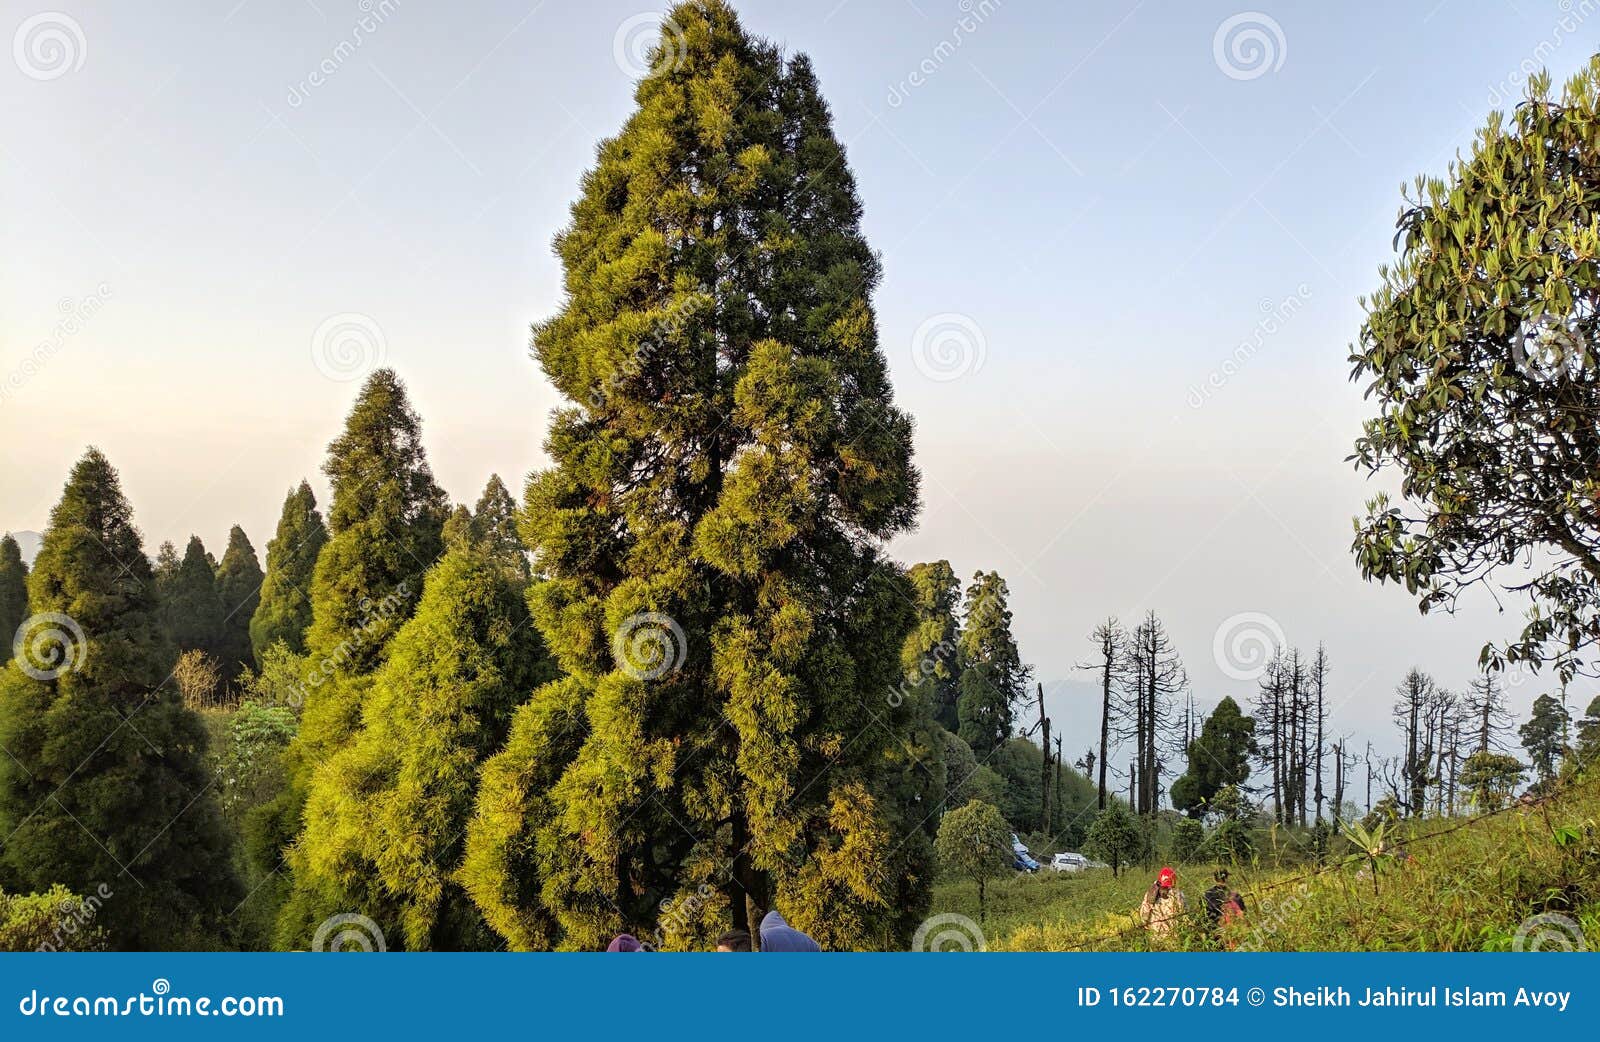 a pine is any conifer in the genus pinus of the family pinaceae. pinus is the sole genus in the subfamily pinoideae.